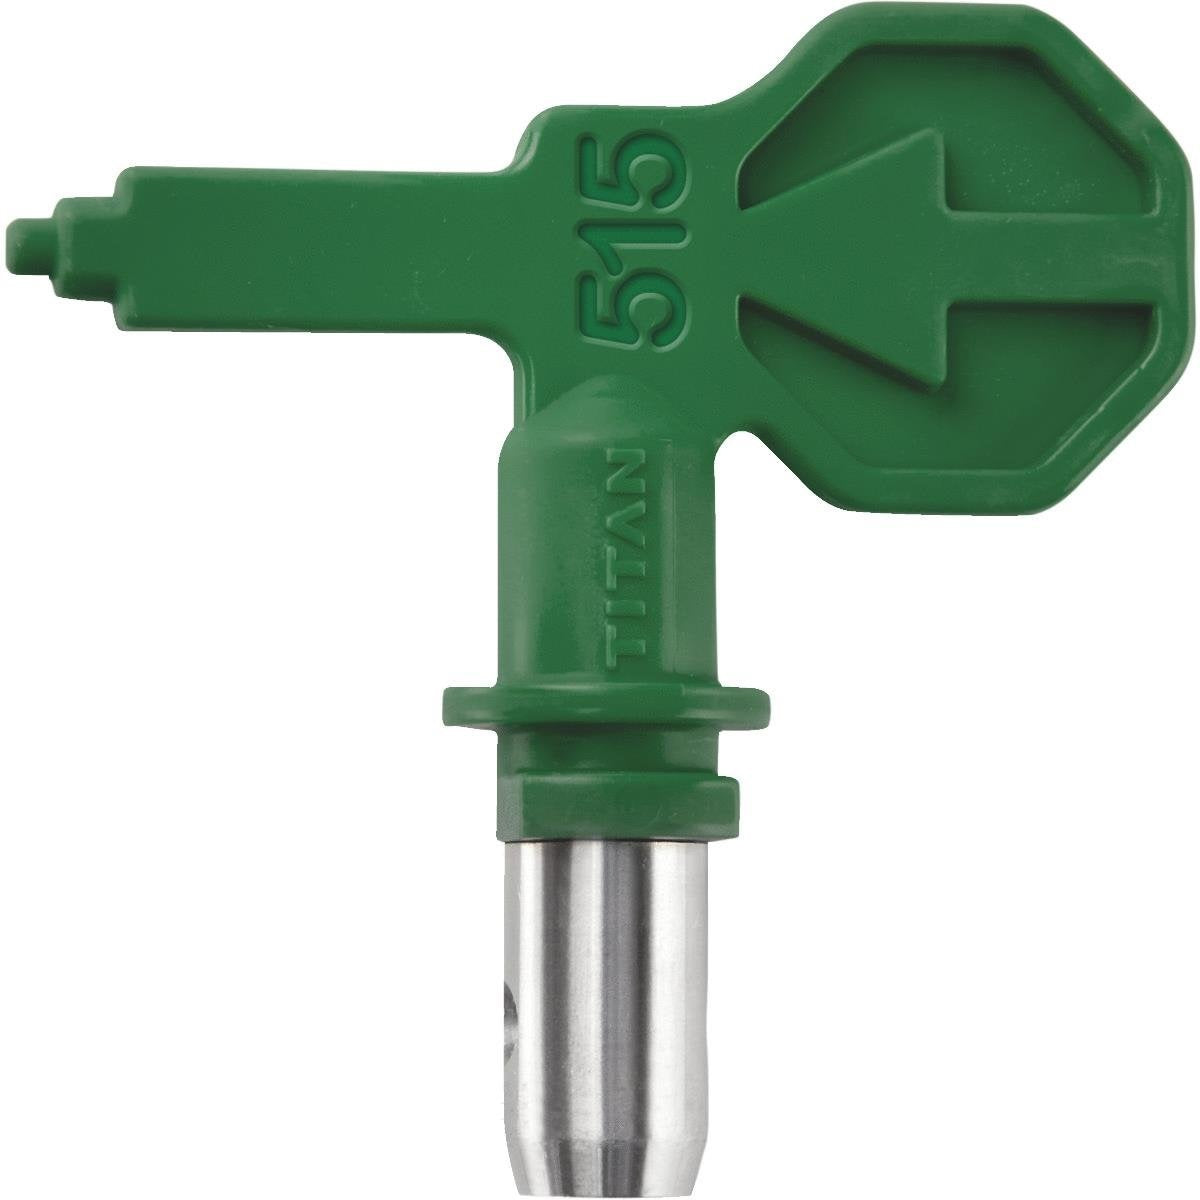 Wagner 353-515 Titan Control Max 515 Airless Spray Tip